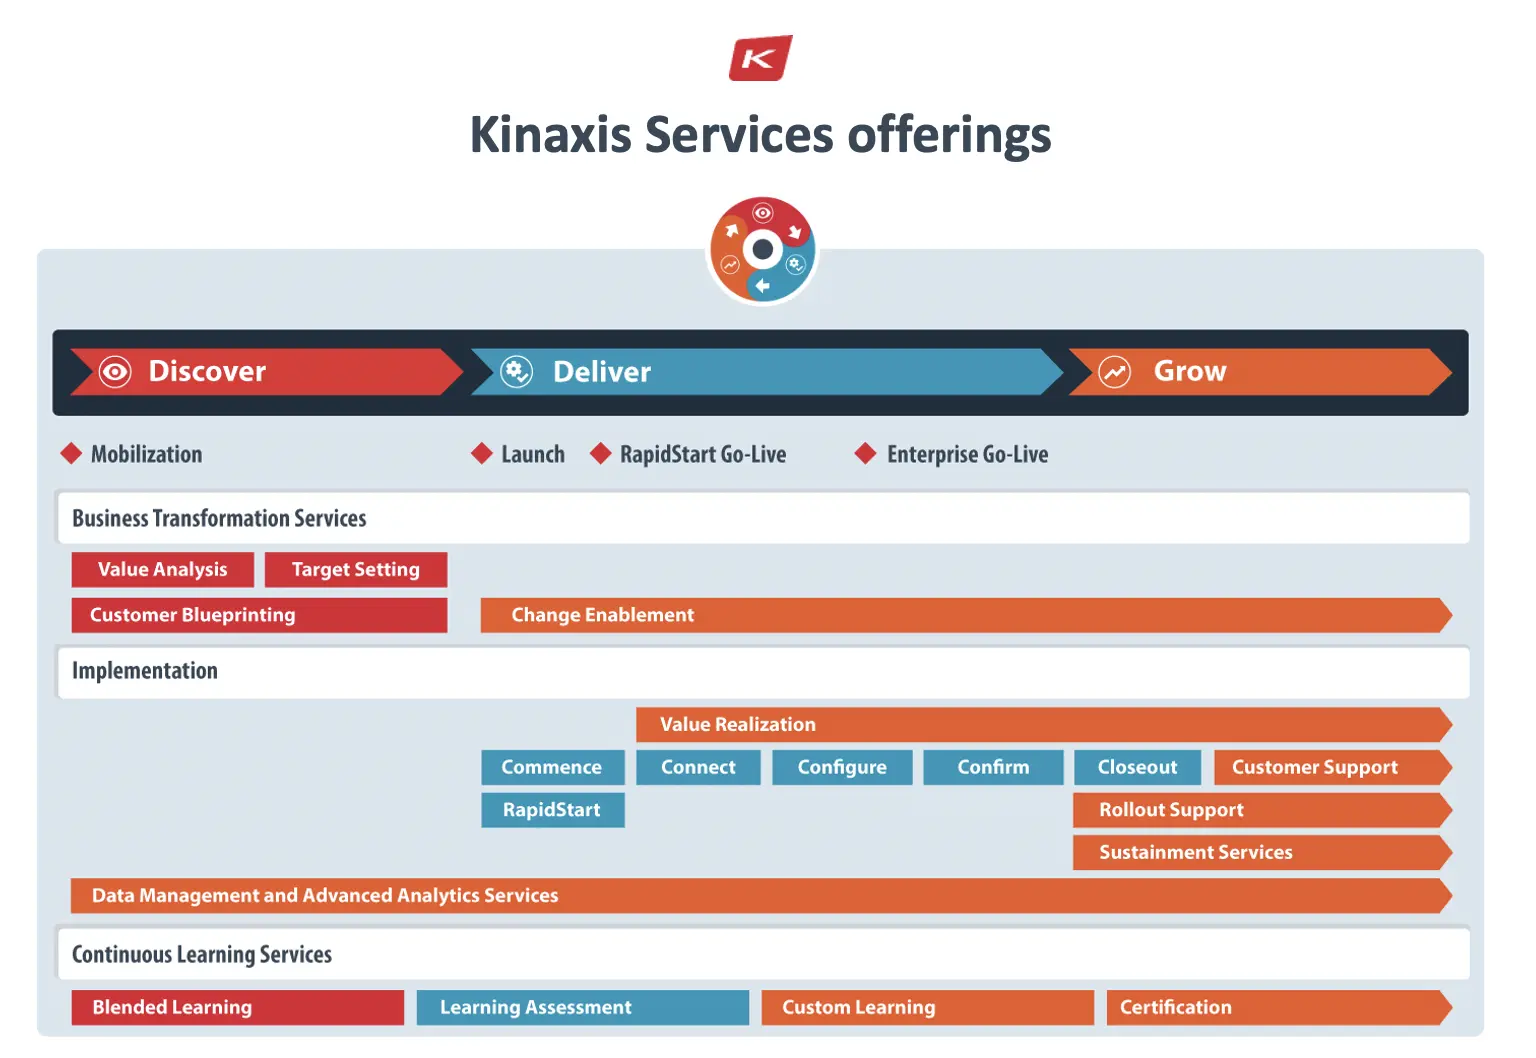 Kinaxis Services Offerings